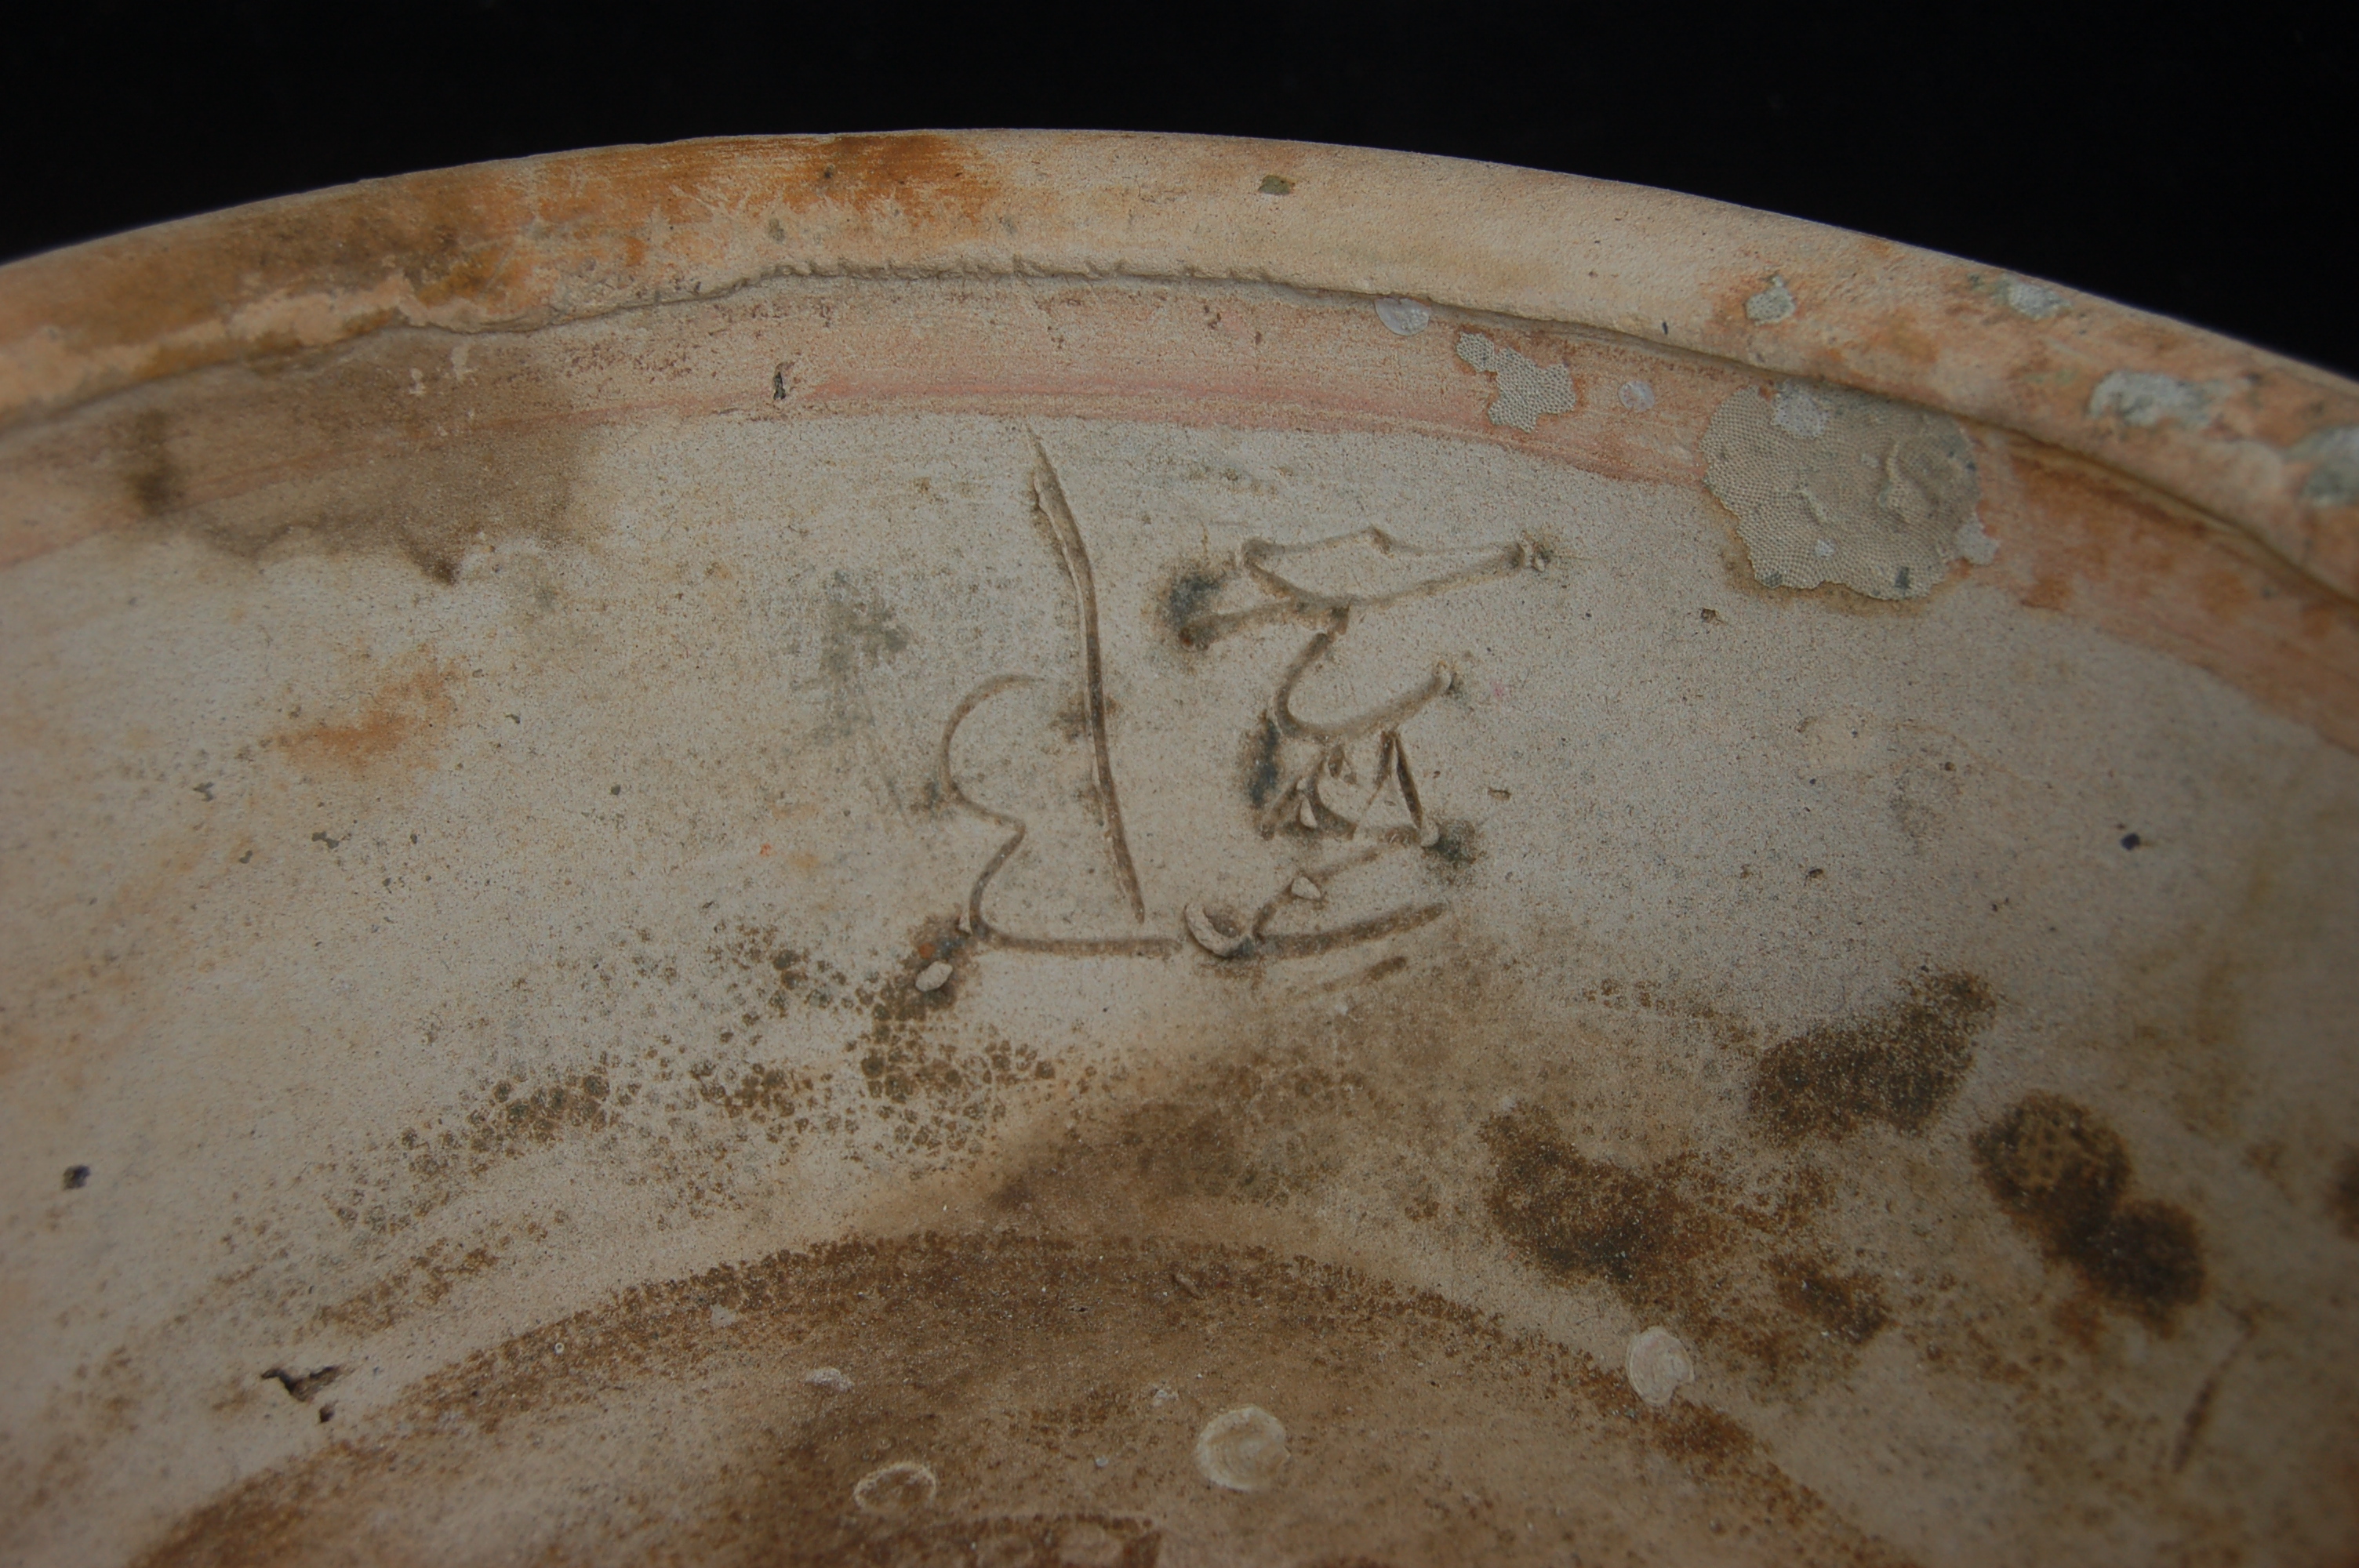 Inscribed characters on a basin cavetto and base.